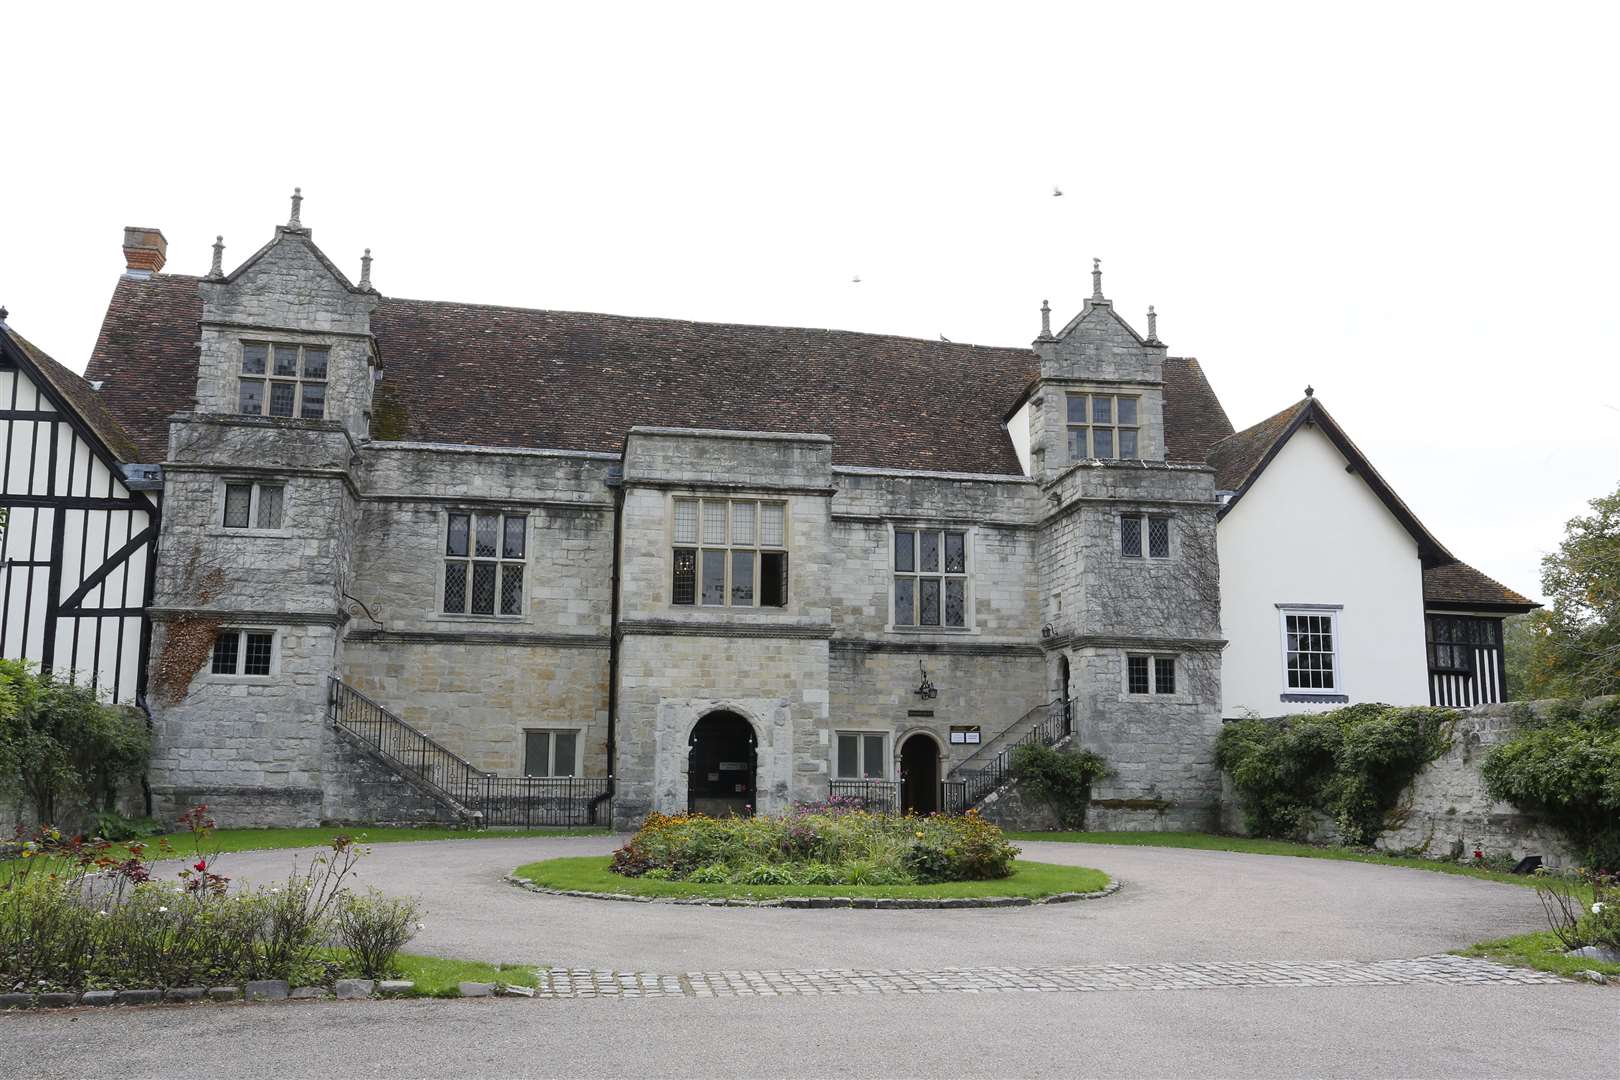 What is the future for the Archbishop's Palace?